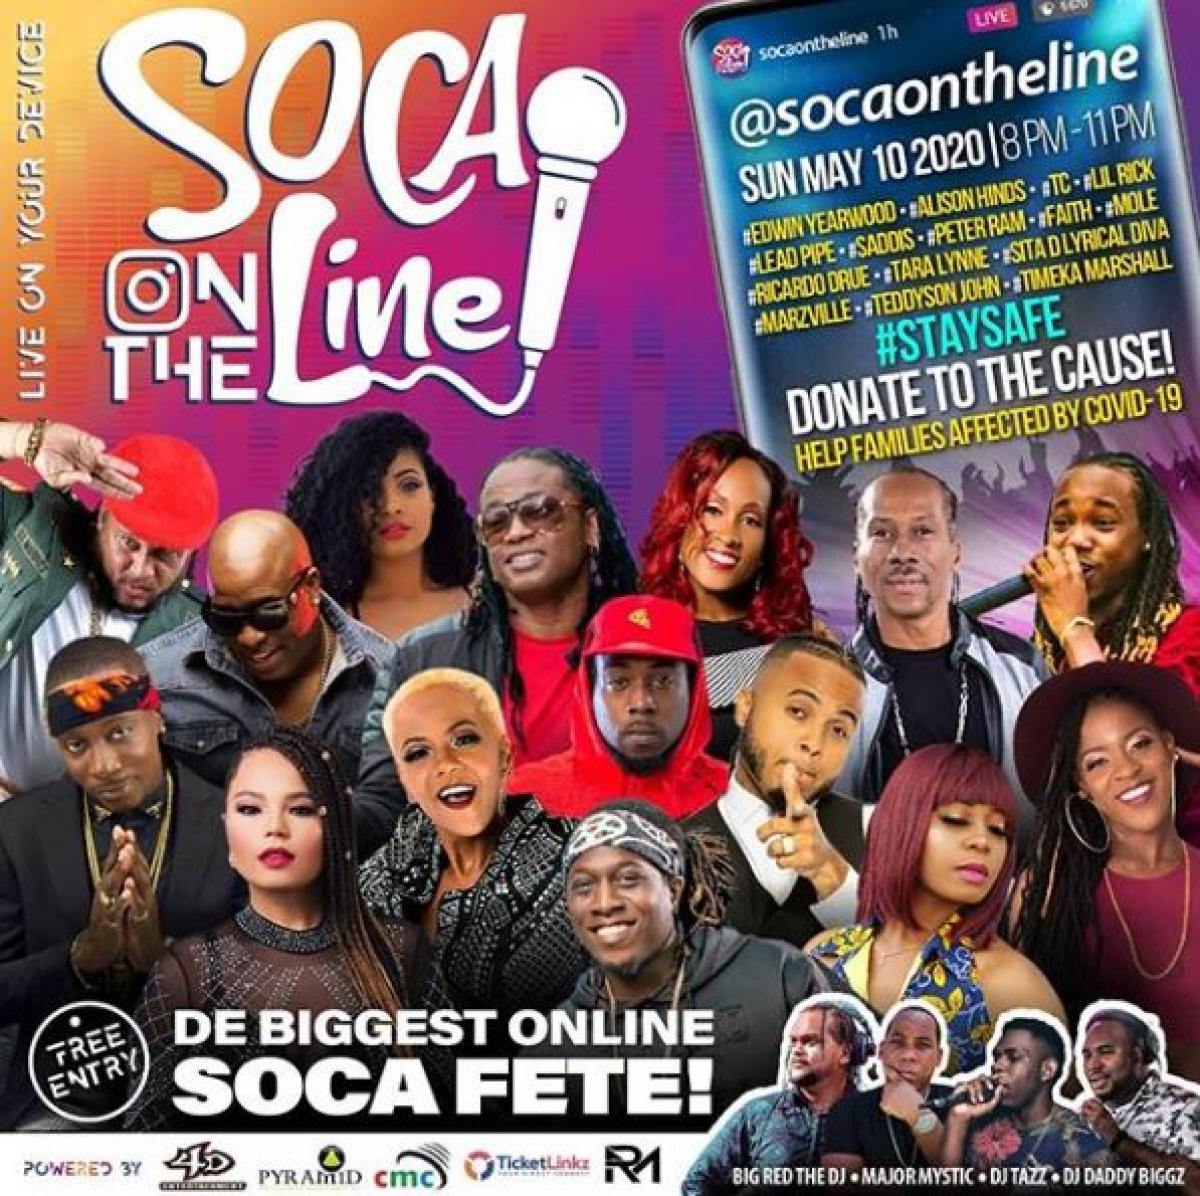 Soca On The Line flyer or graphic.